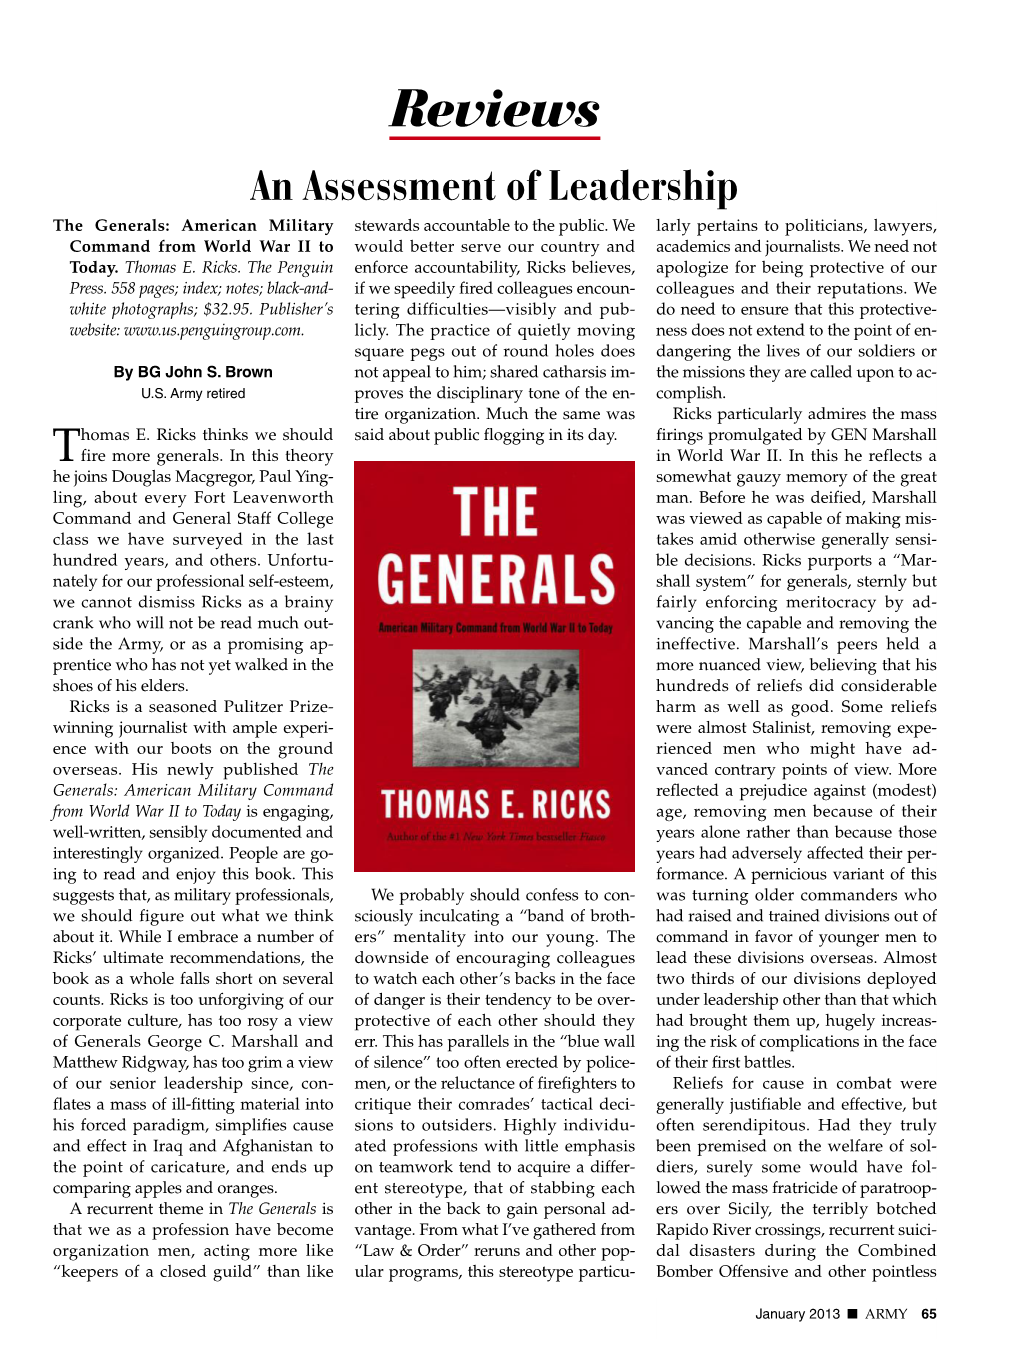 Reviews an Assessment of Leadership the Generals: American Military Stewards Accountable to the Public